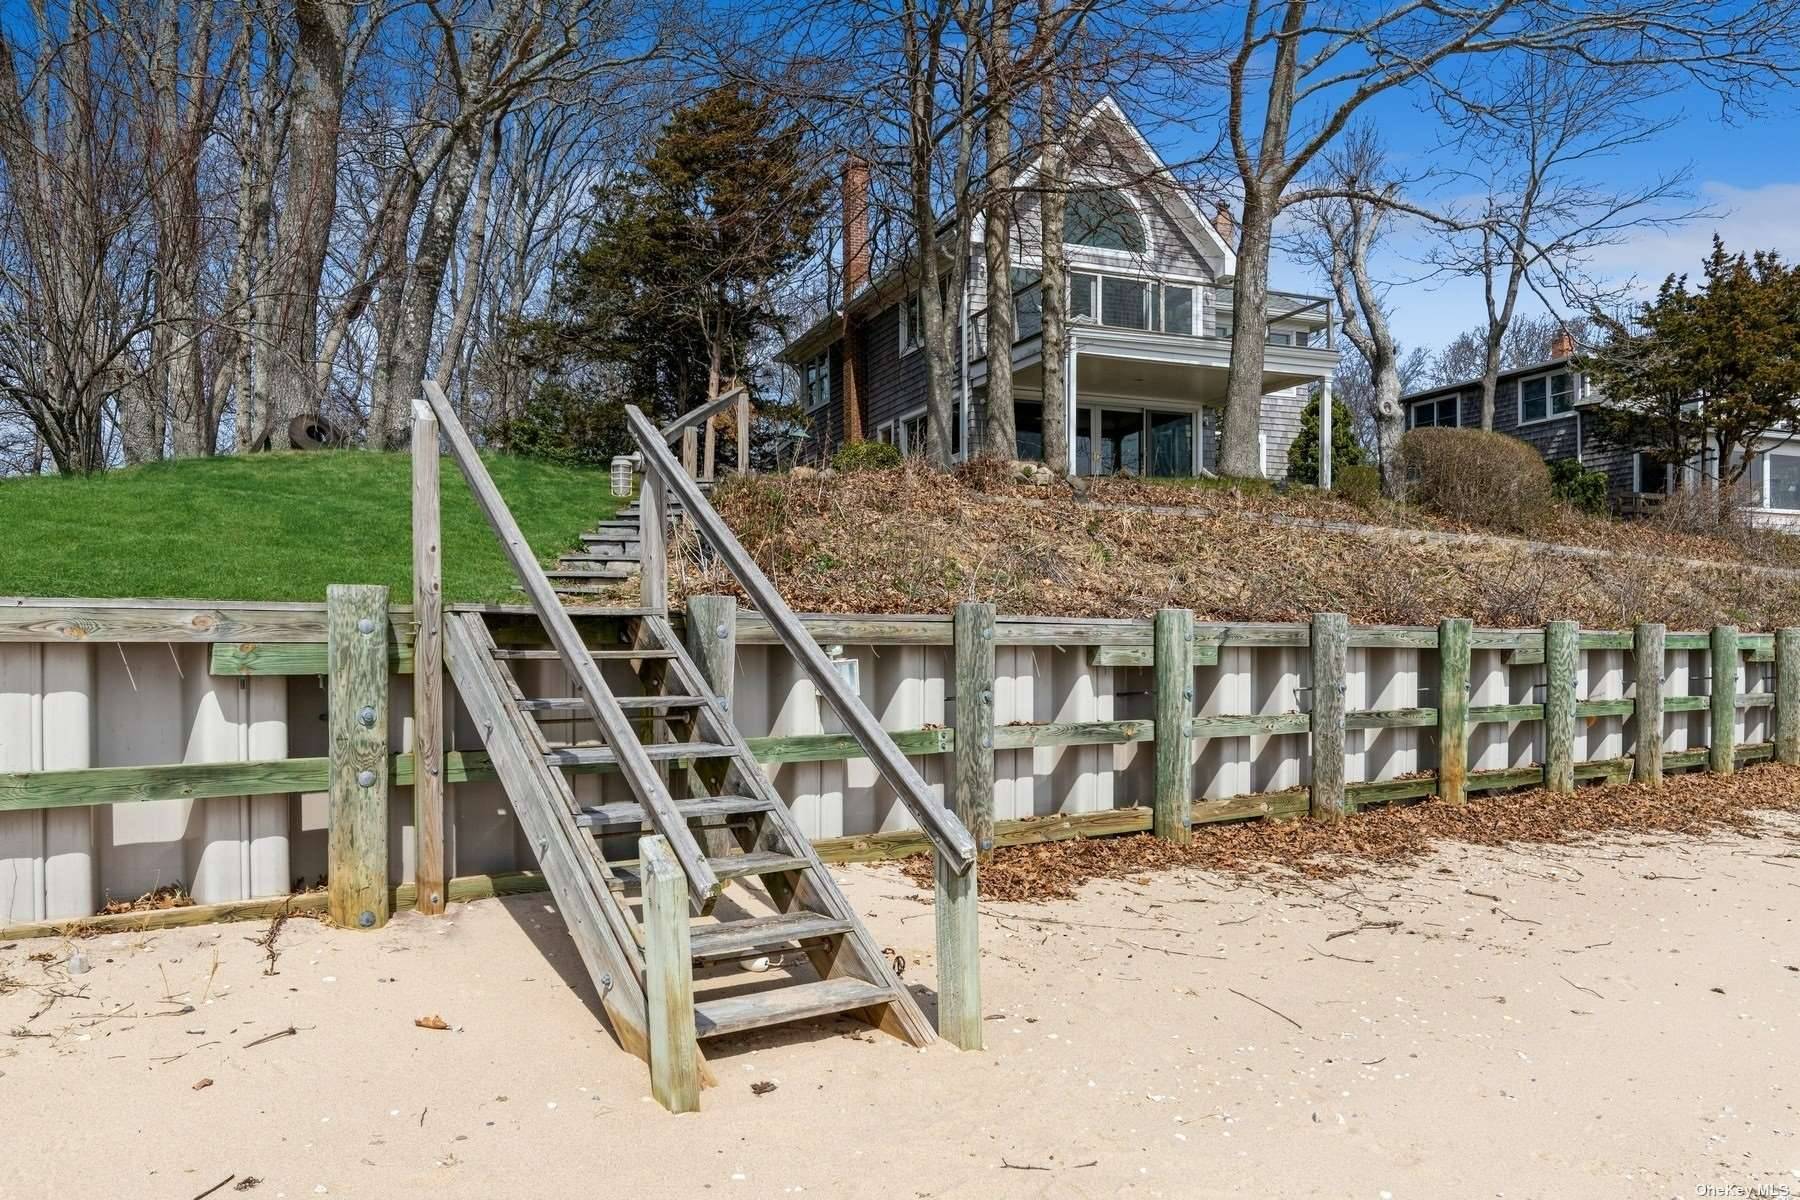 Cape Cod Style Cedar Shingle House situated on edge of low bluff.